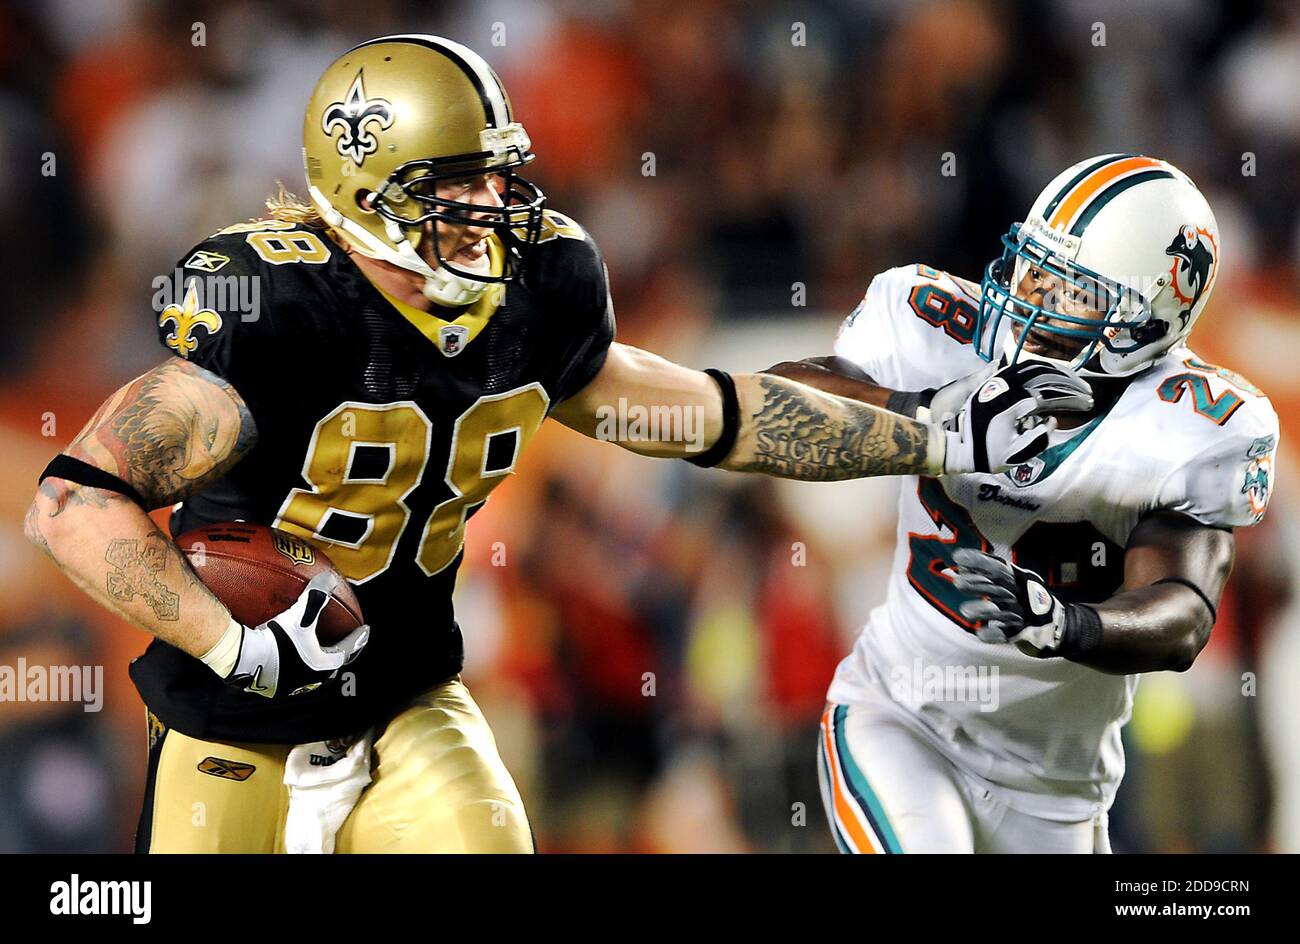 Jeremy Shockey very interested in playing for Dolphins - NBC Sports